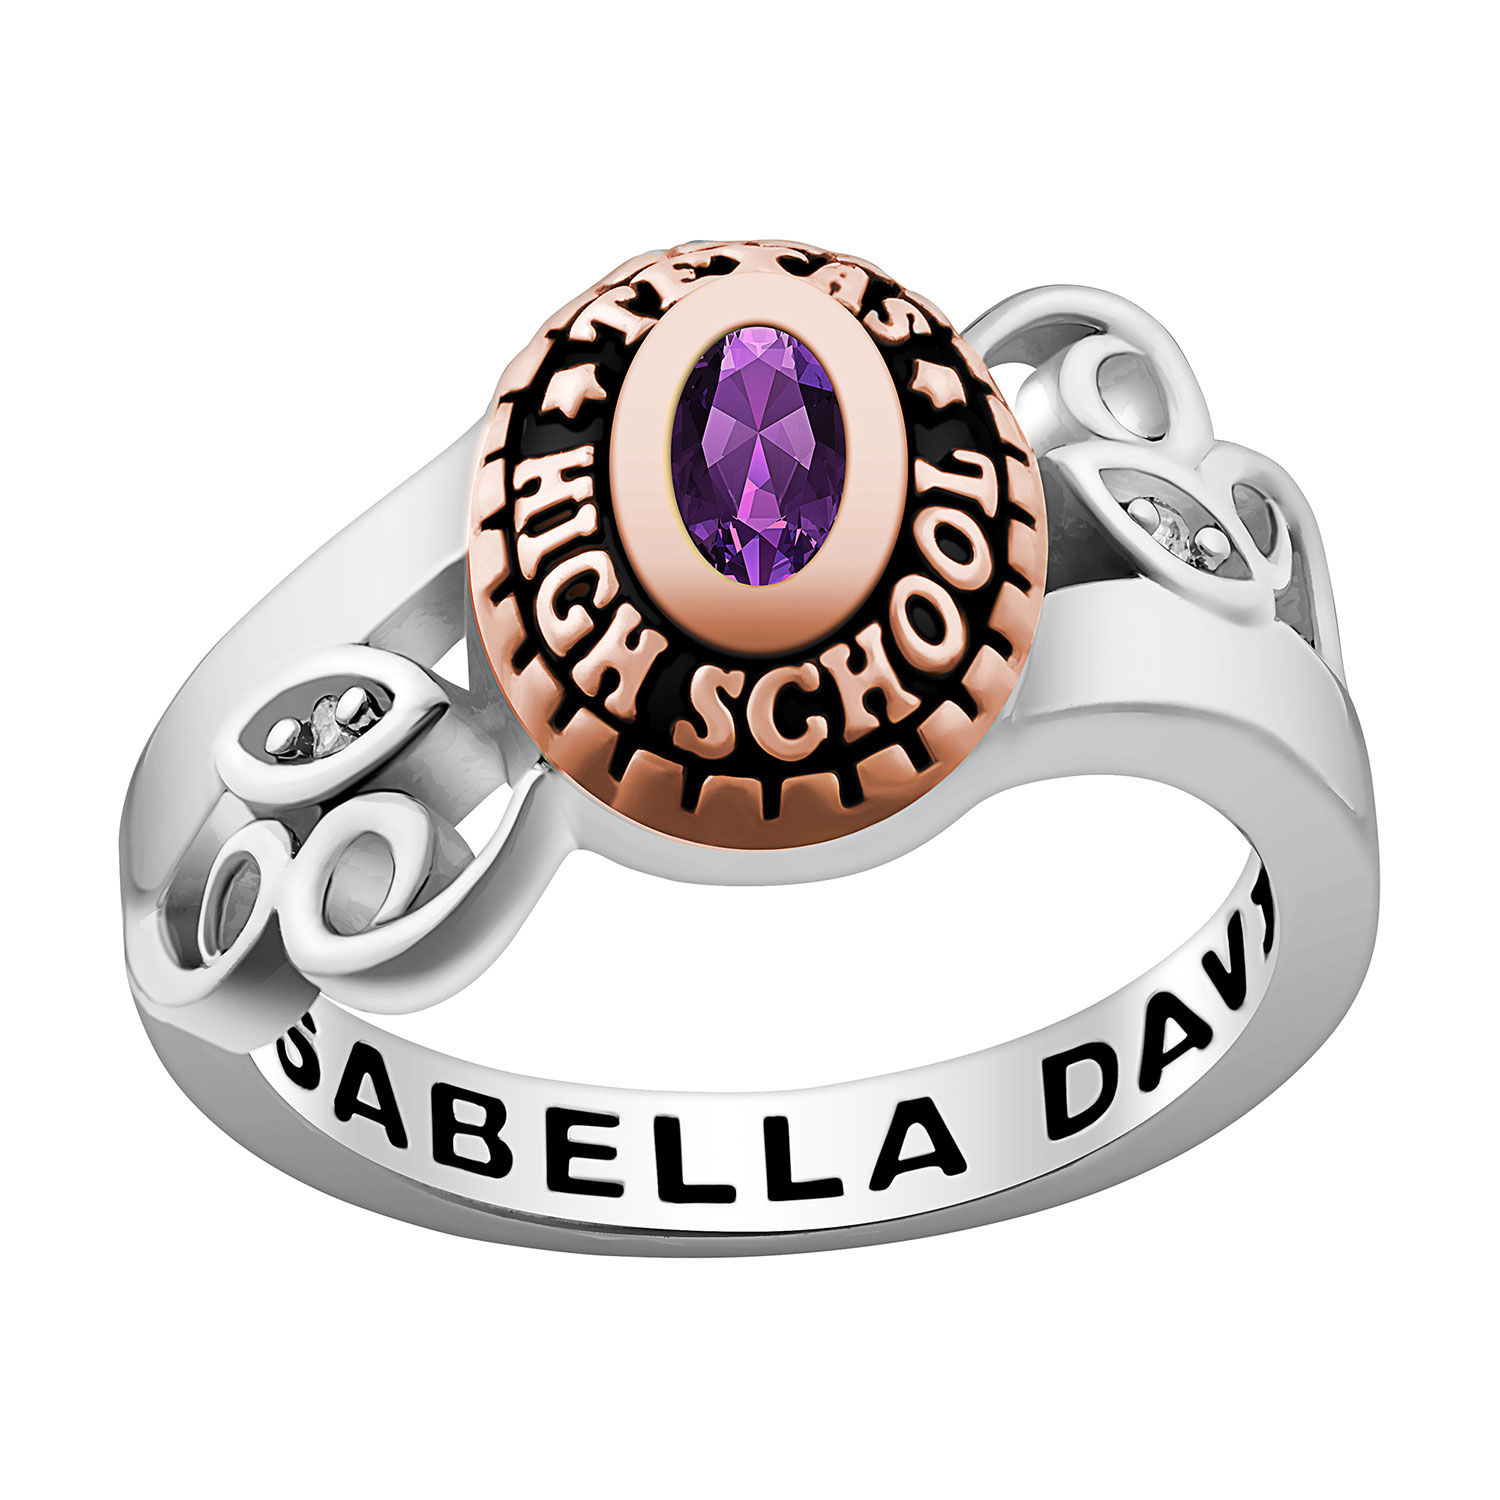 Ladies' Sterling Silver and 14K Rose Gold over Sterling Swirl Birthstone Class Ring